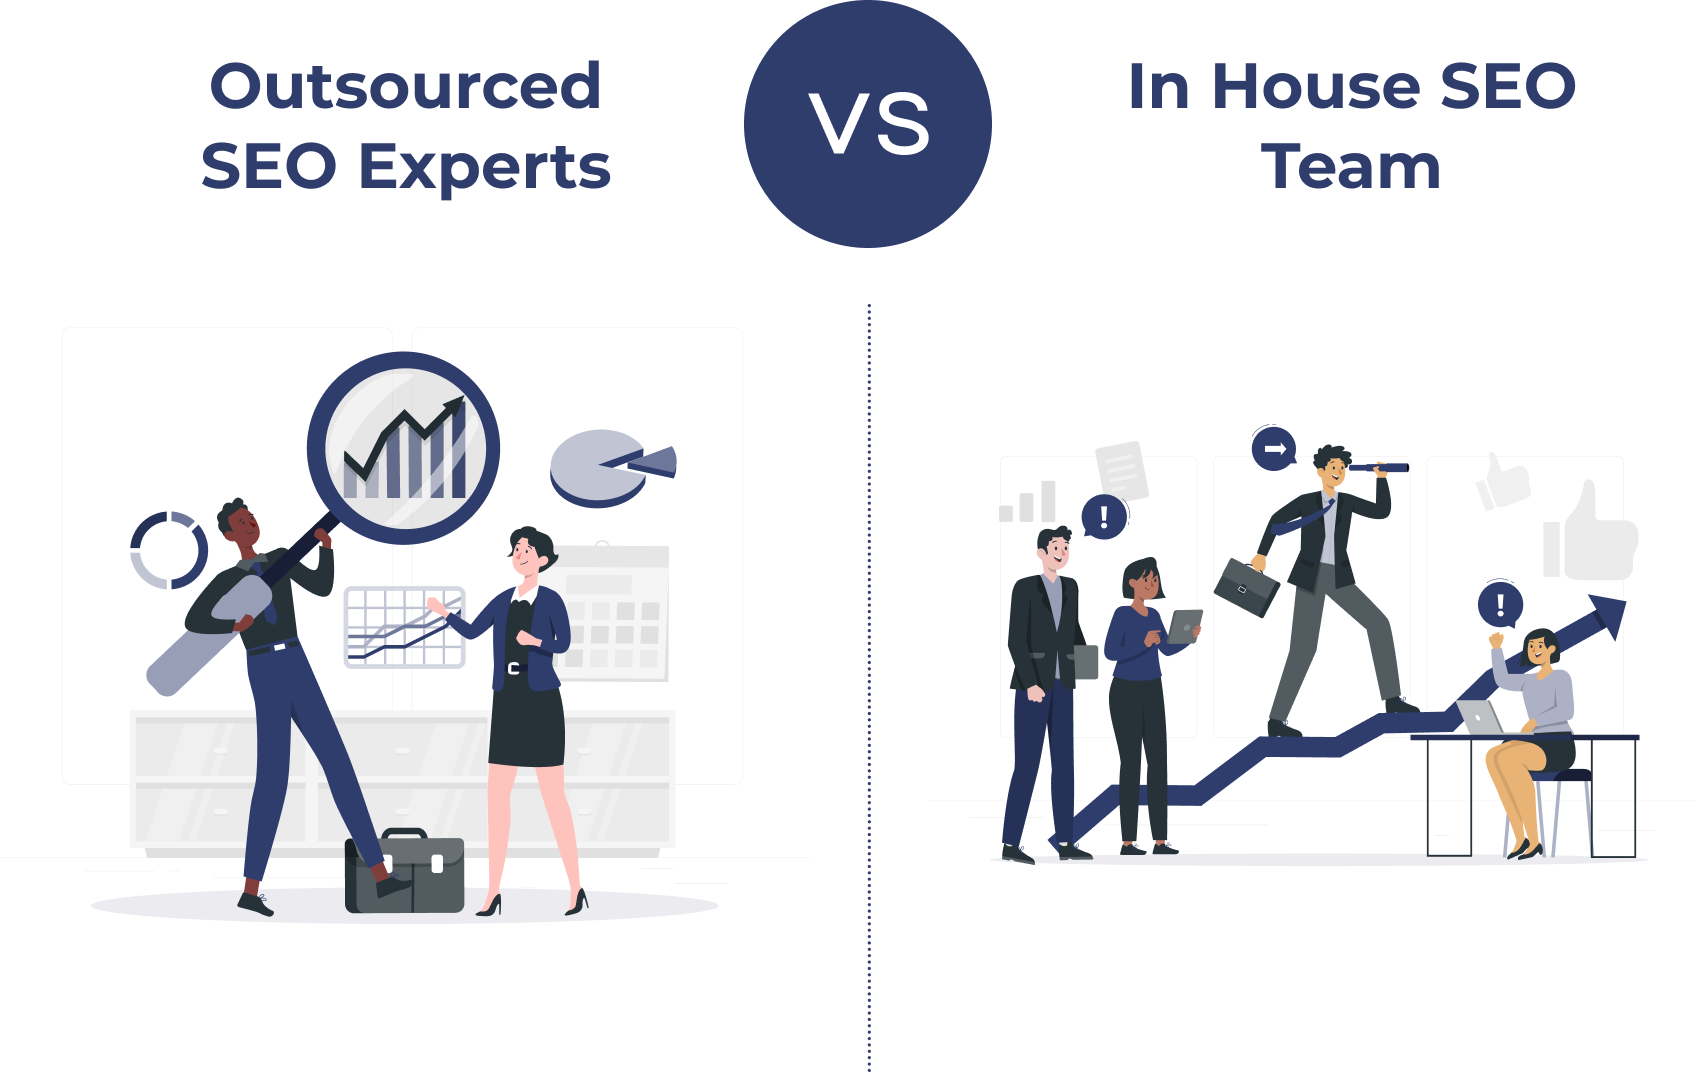 Outsourced SEO Experts vs In house SEO Team: Takeaways From Enterprise Perspective